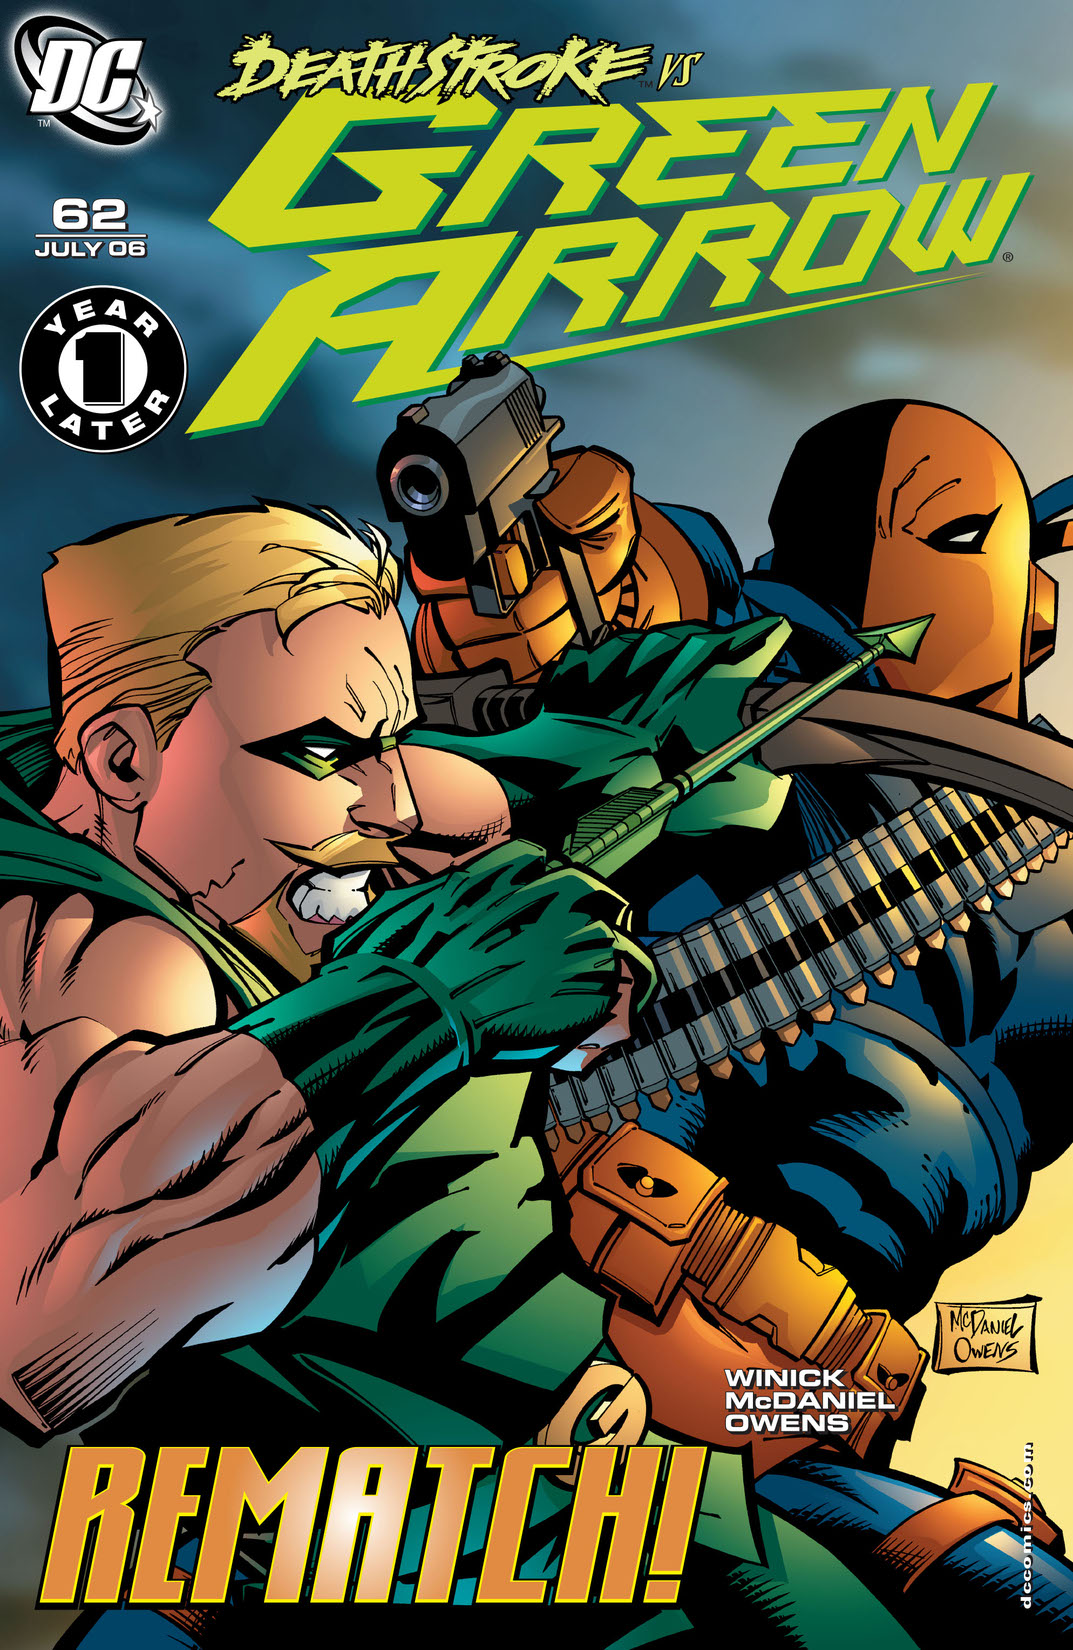 Green Arrow (2001-) #62 preview images